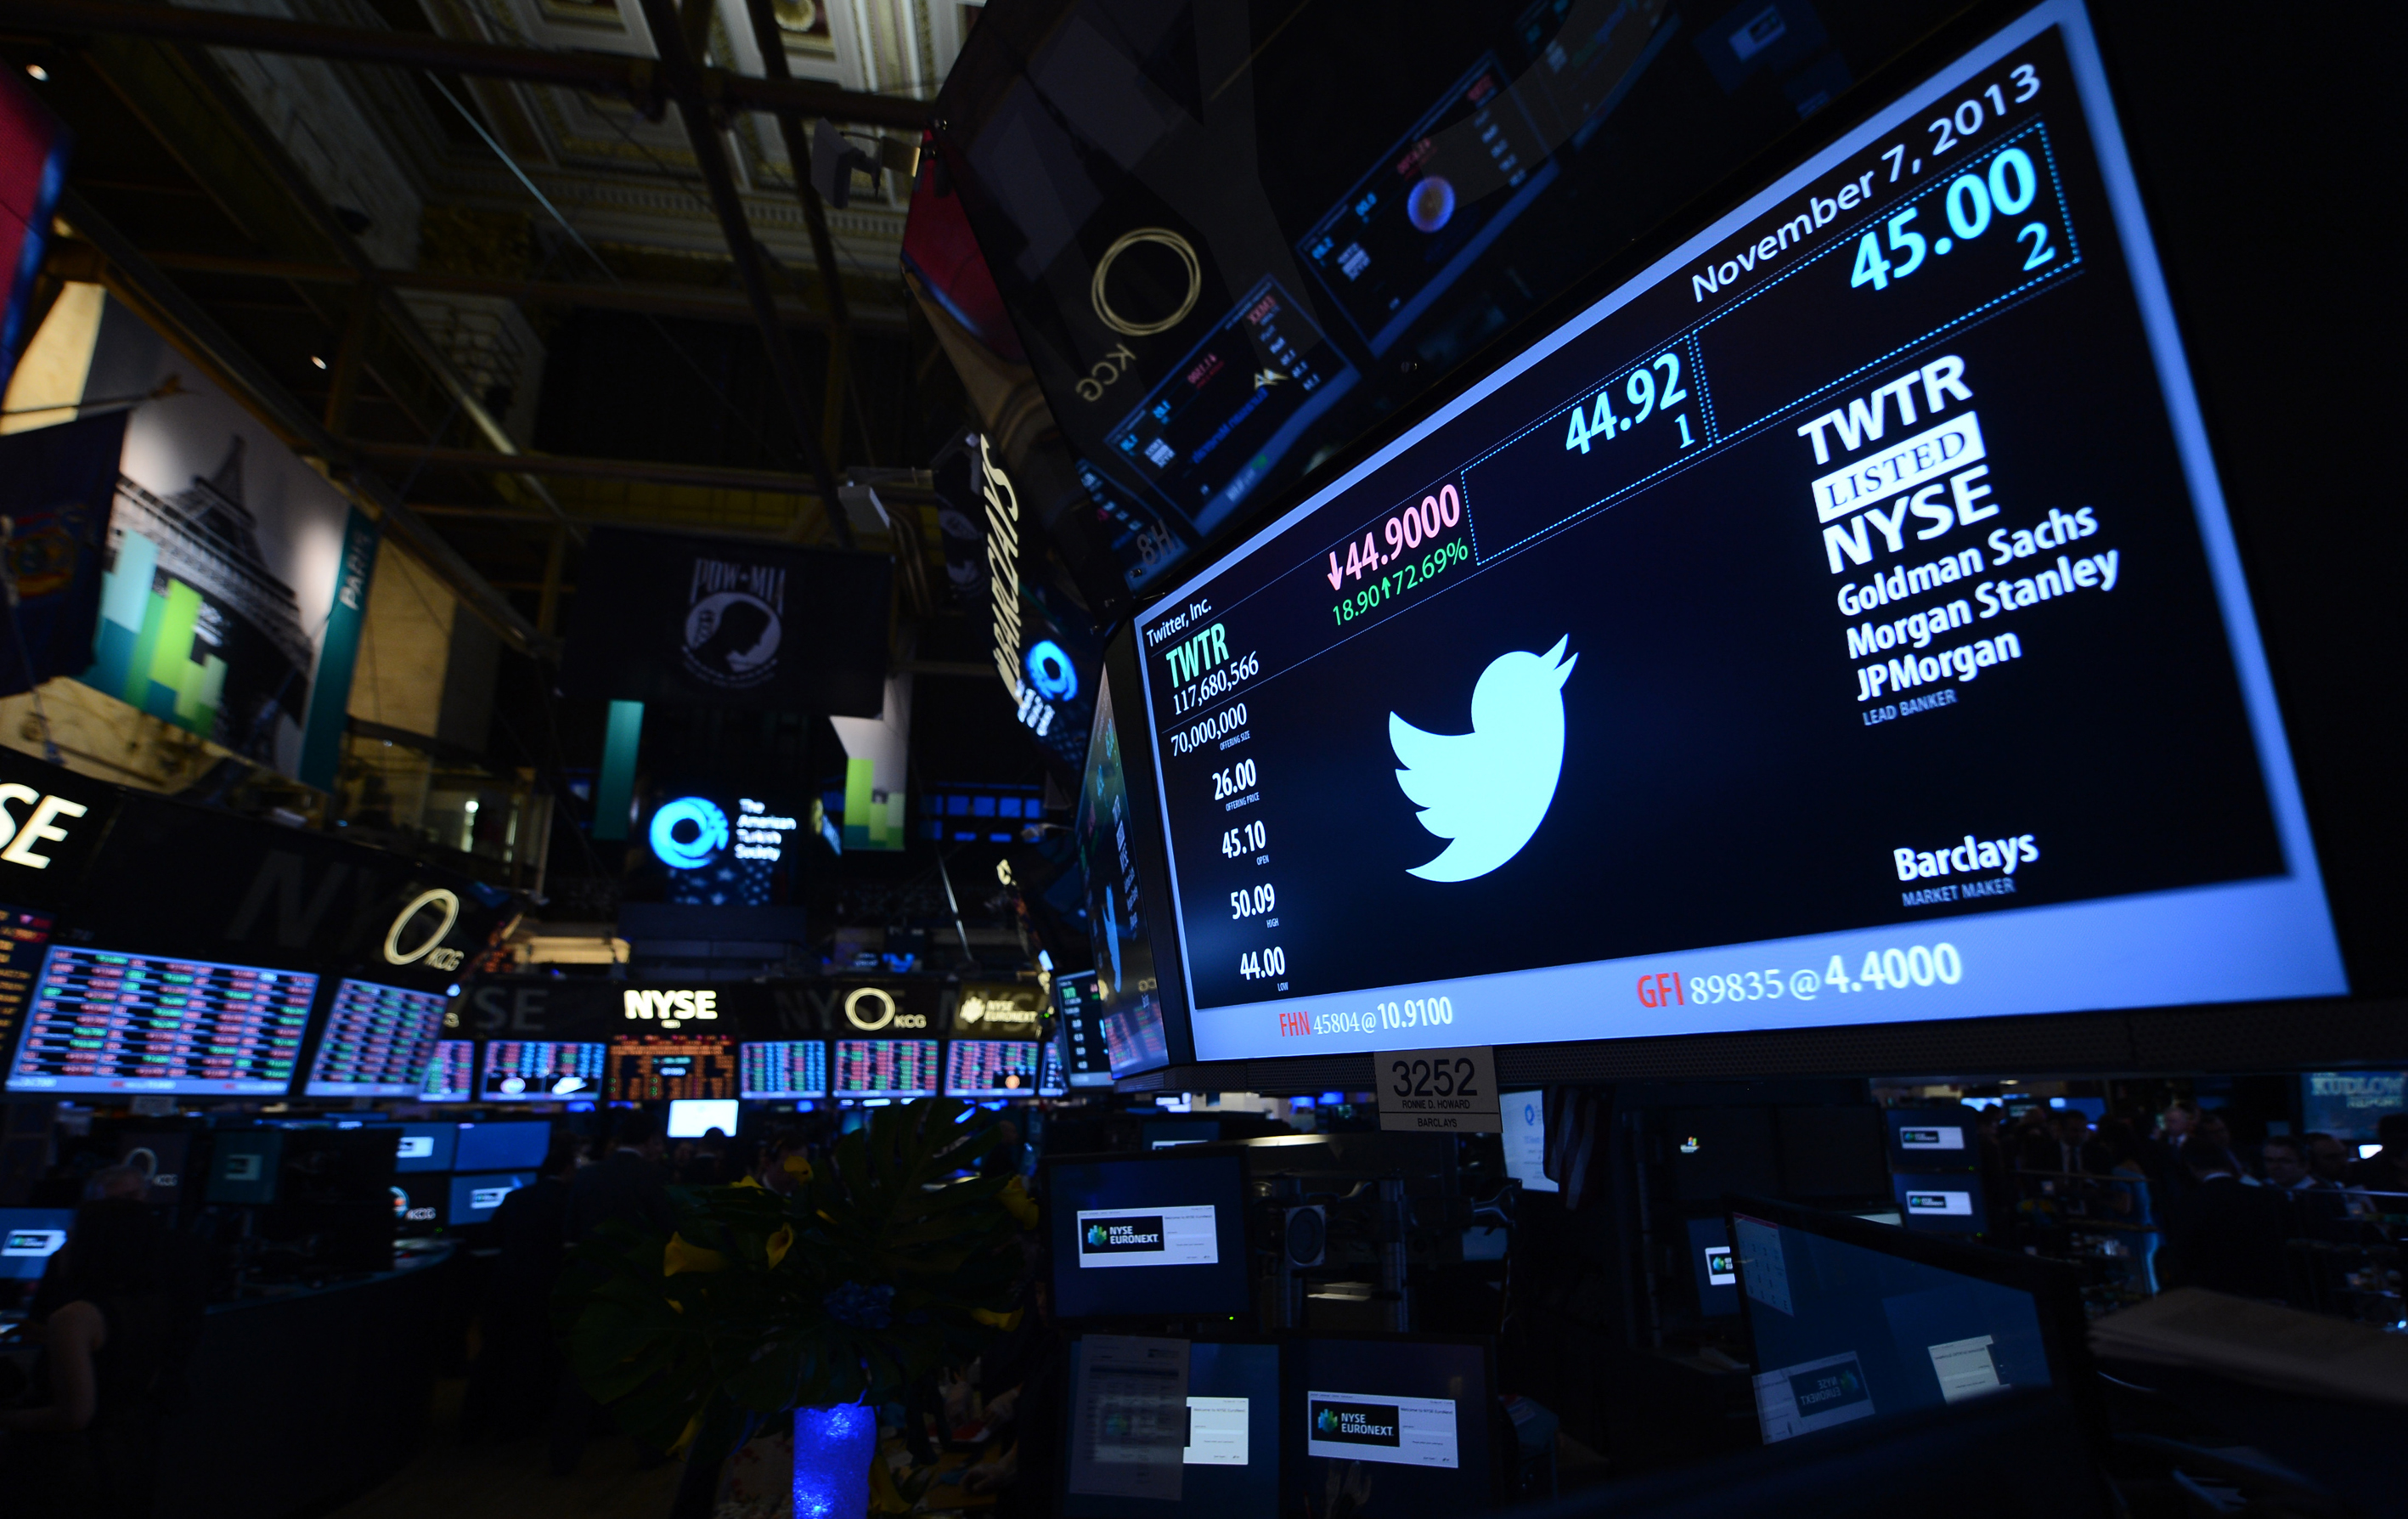 Twitter shares have closed at $44.90 a share on its first day of trading, 73 percent above its initial offering price on November 7, 2013 in New York. (Anadolu Agency—Getty Images)